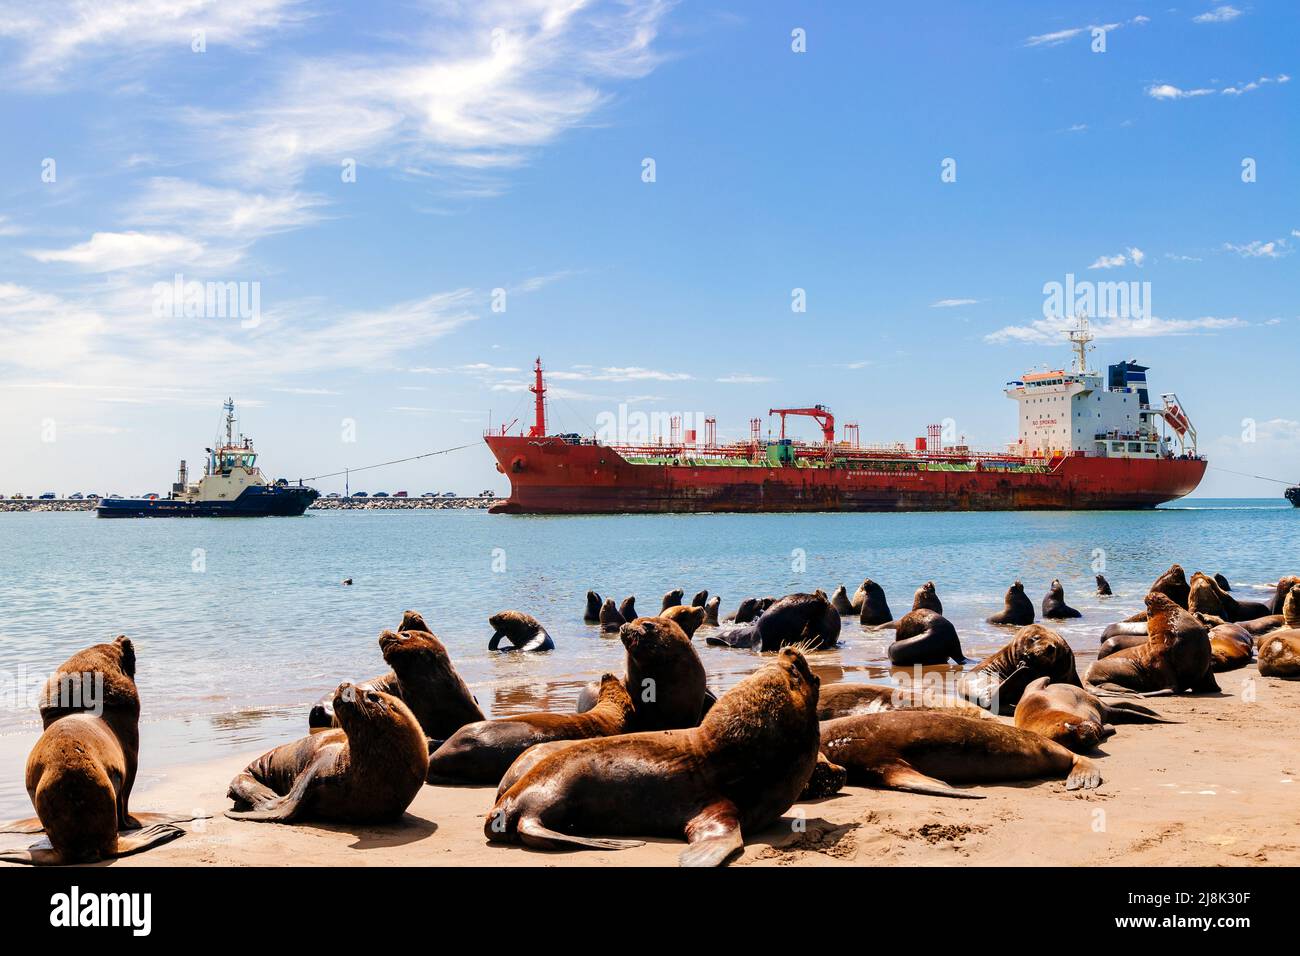 Bulk carrier entering the Port of Necochea in Argentina. View of the port with many sea lions on the beach. Stock Photo